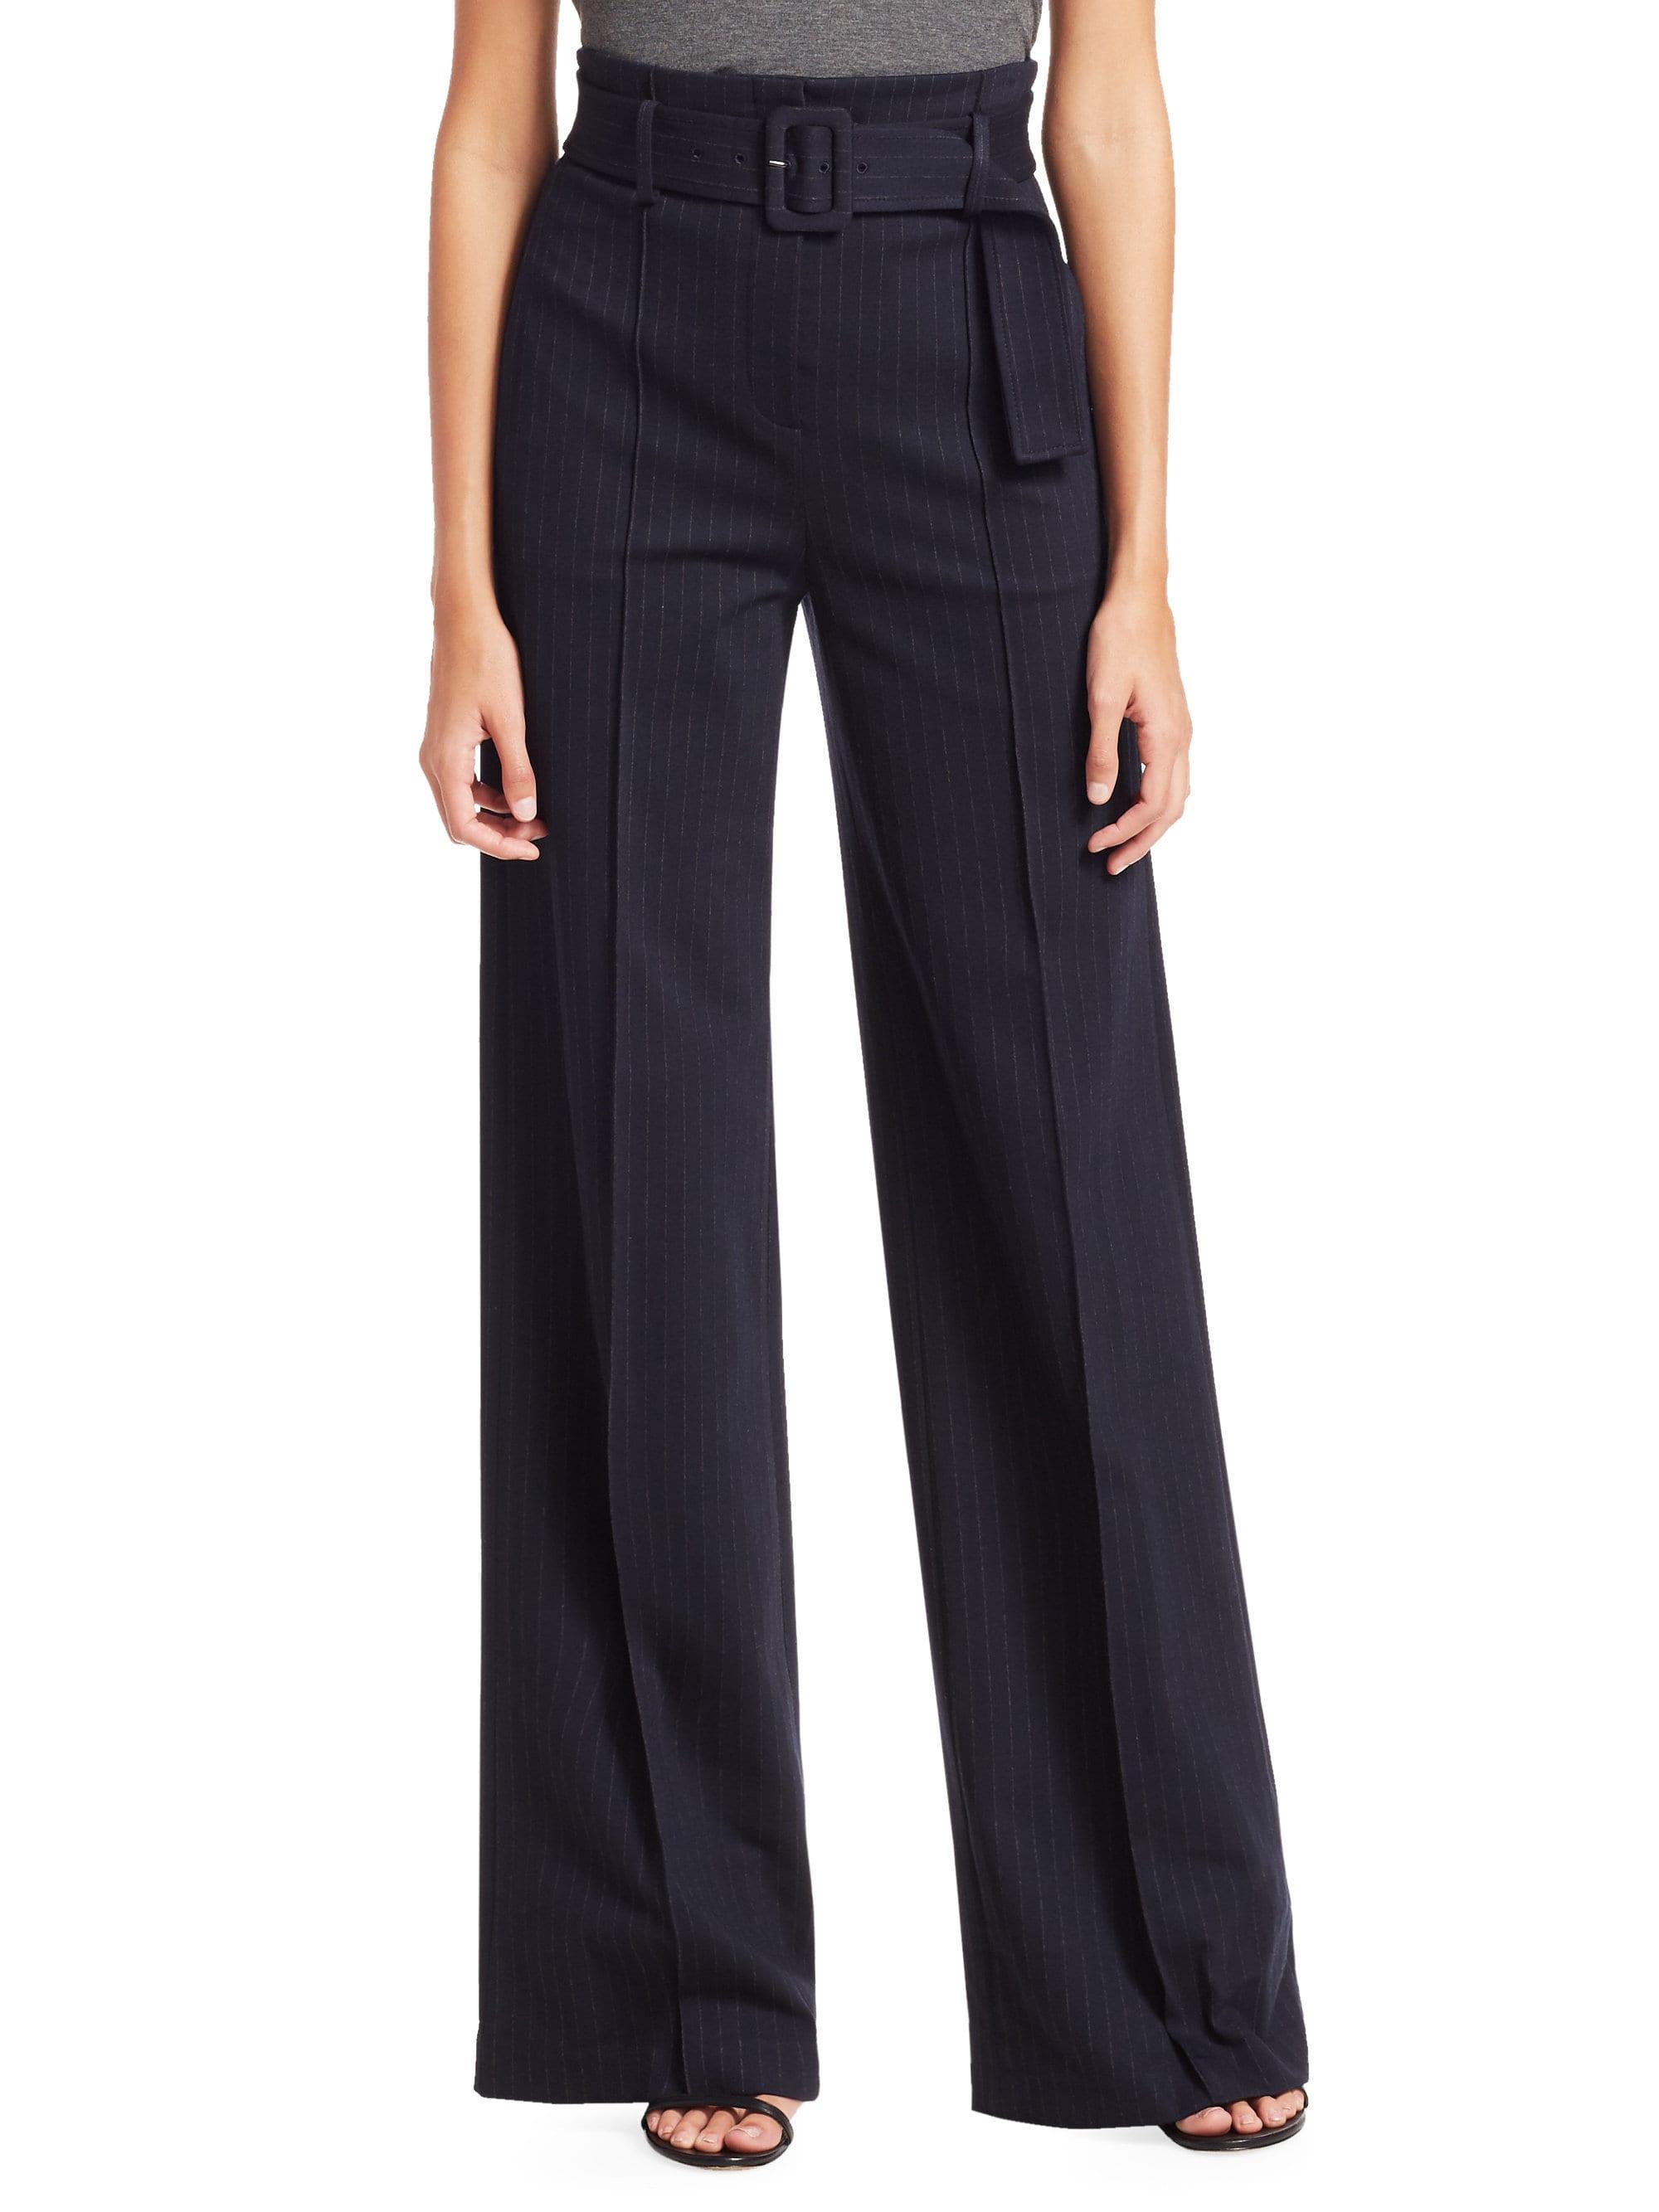 Theory High-waist Belted Pinstripe Pants in Blue - Lyst